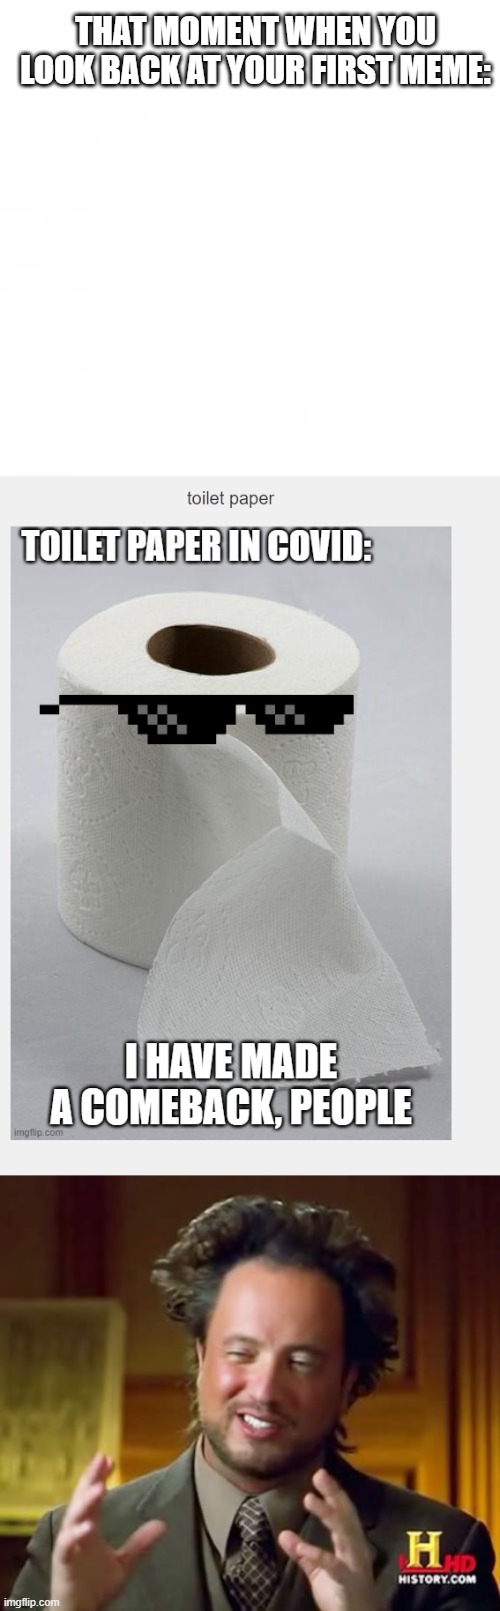 Behold.  My first meme. | THAT MOMENT WHEN YOU LOOK BACK AT YOUR FIRST MEME: | image tagged in memes,ancient aliens,yuck,behold,toilet paper,first meme | made w/ Imgflip meme maker